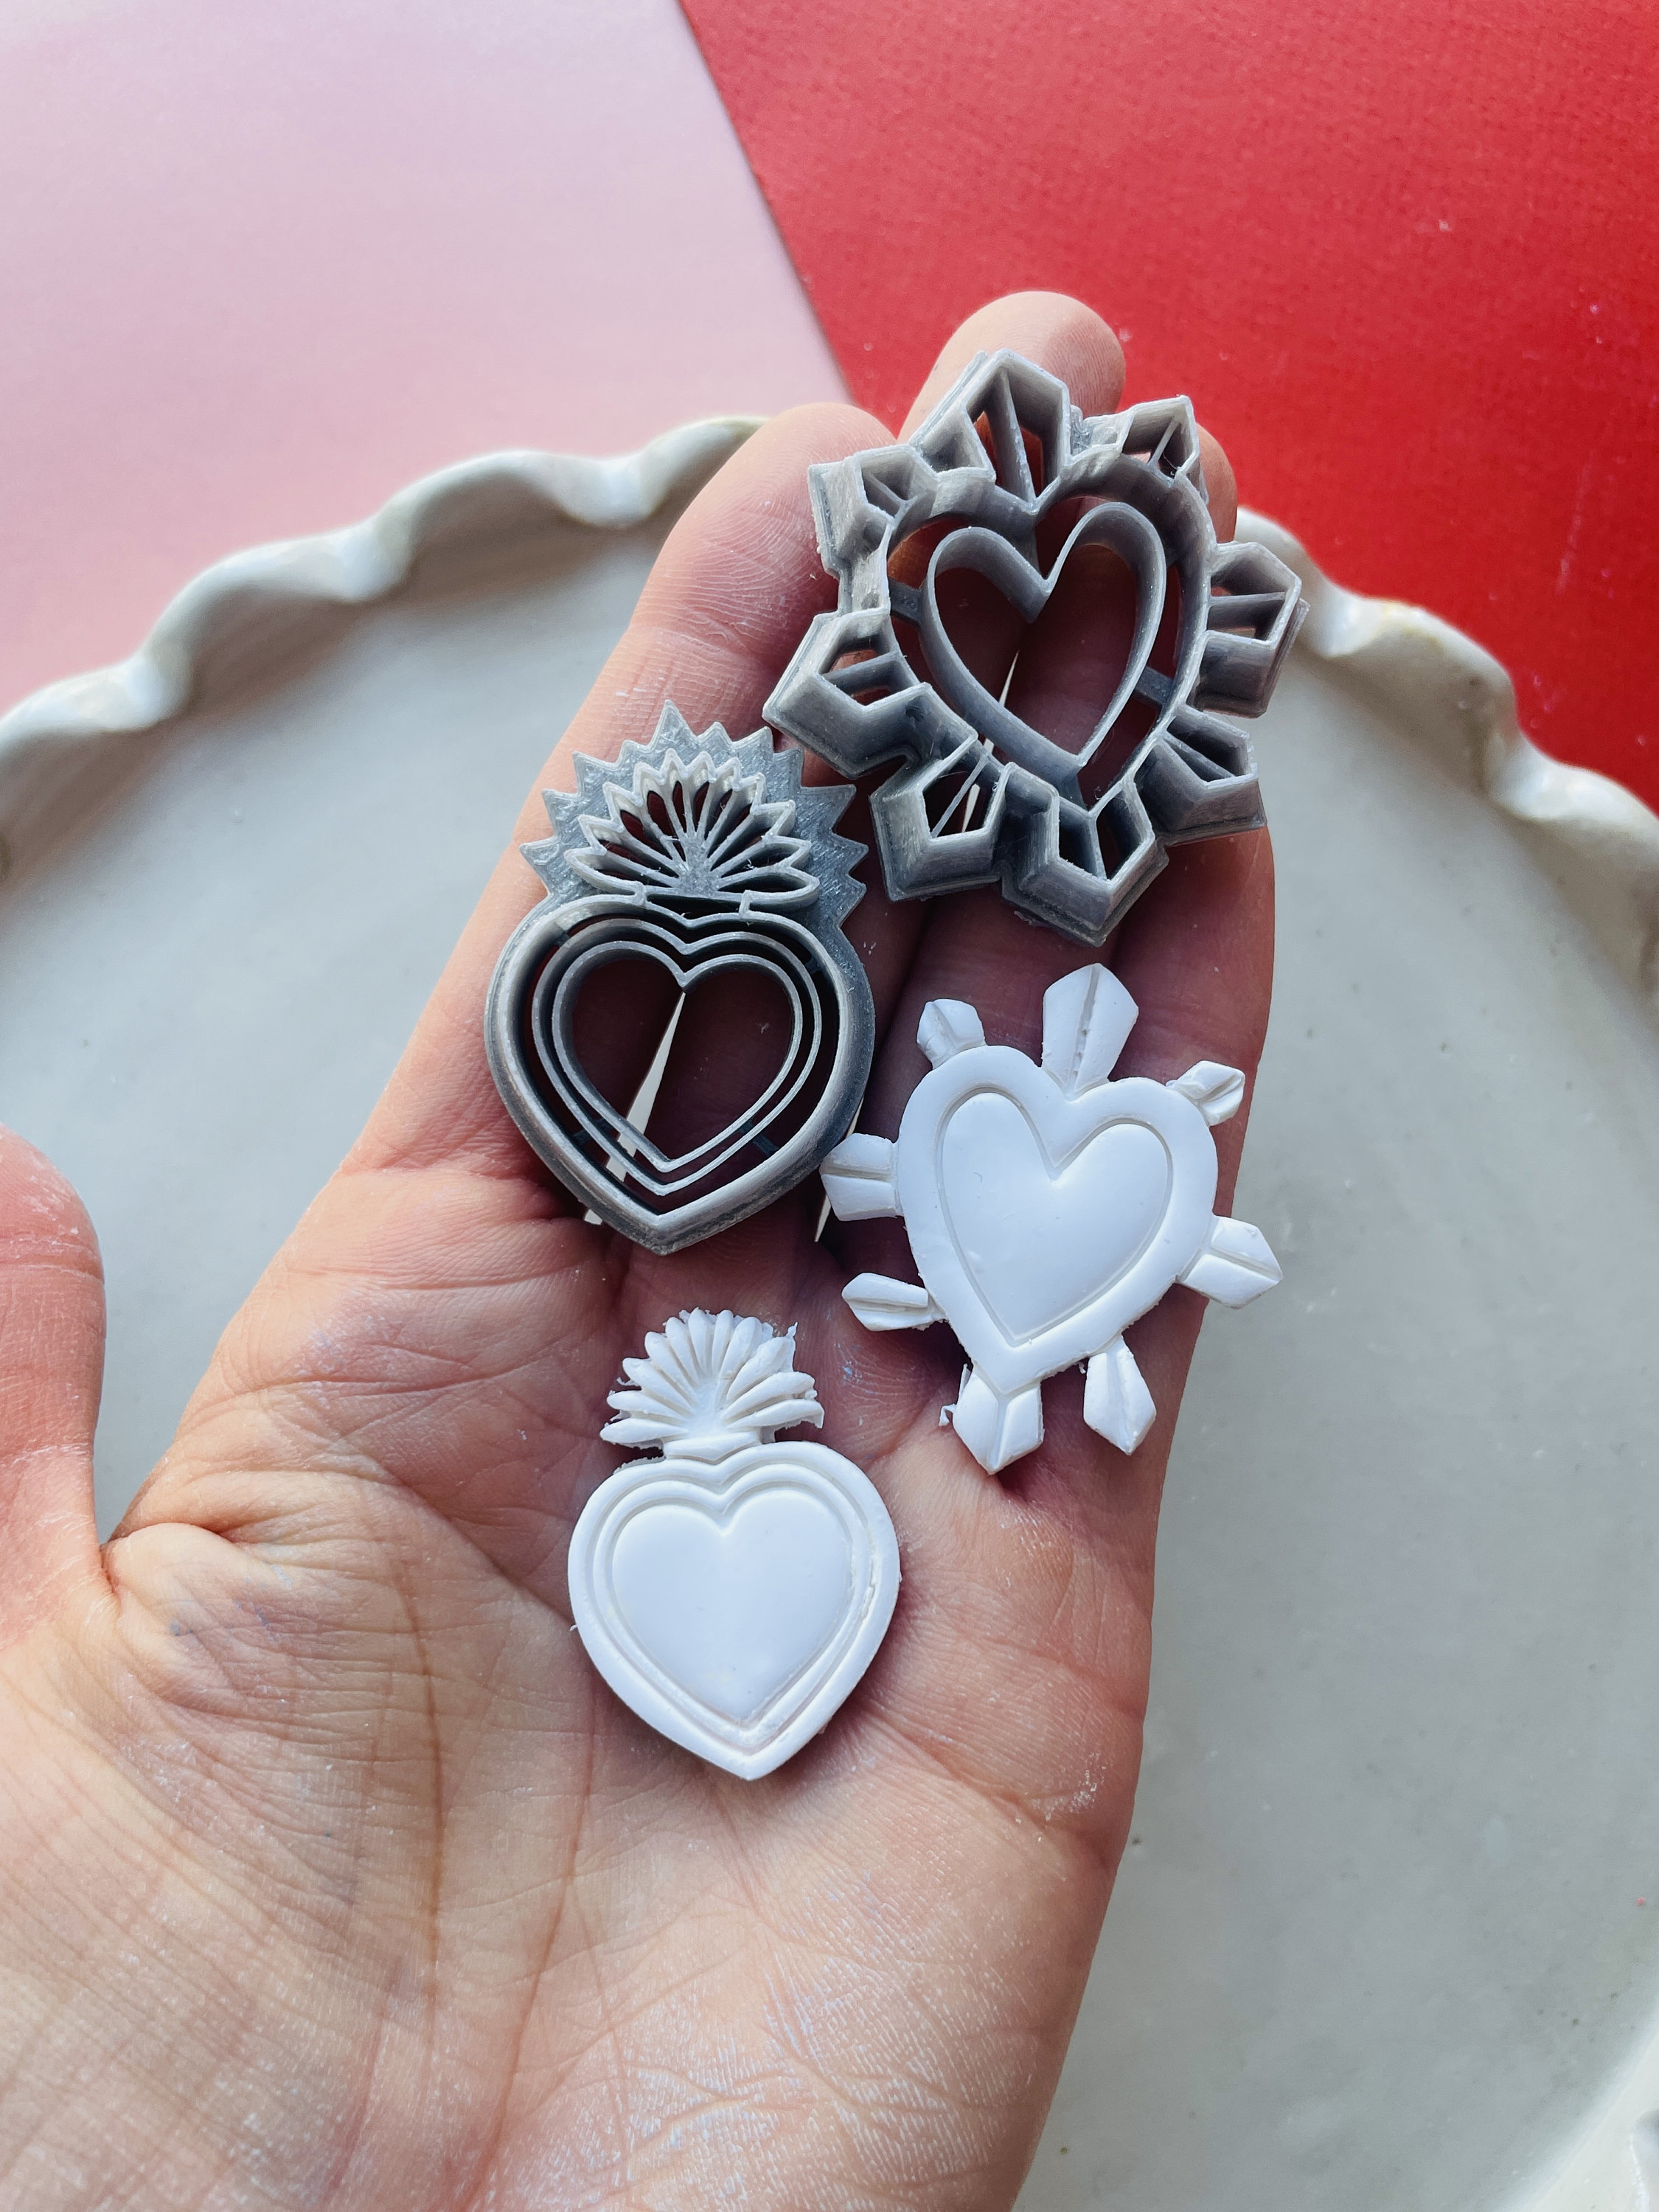 VALENTINES SET 14 Polymer Clay Cutters Clay Imprint Embossed Stamp